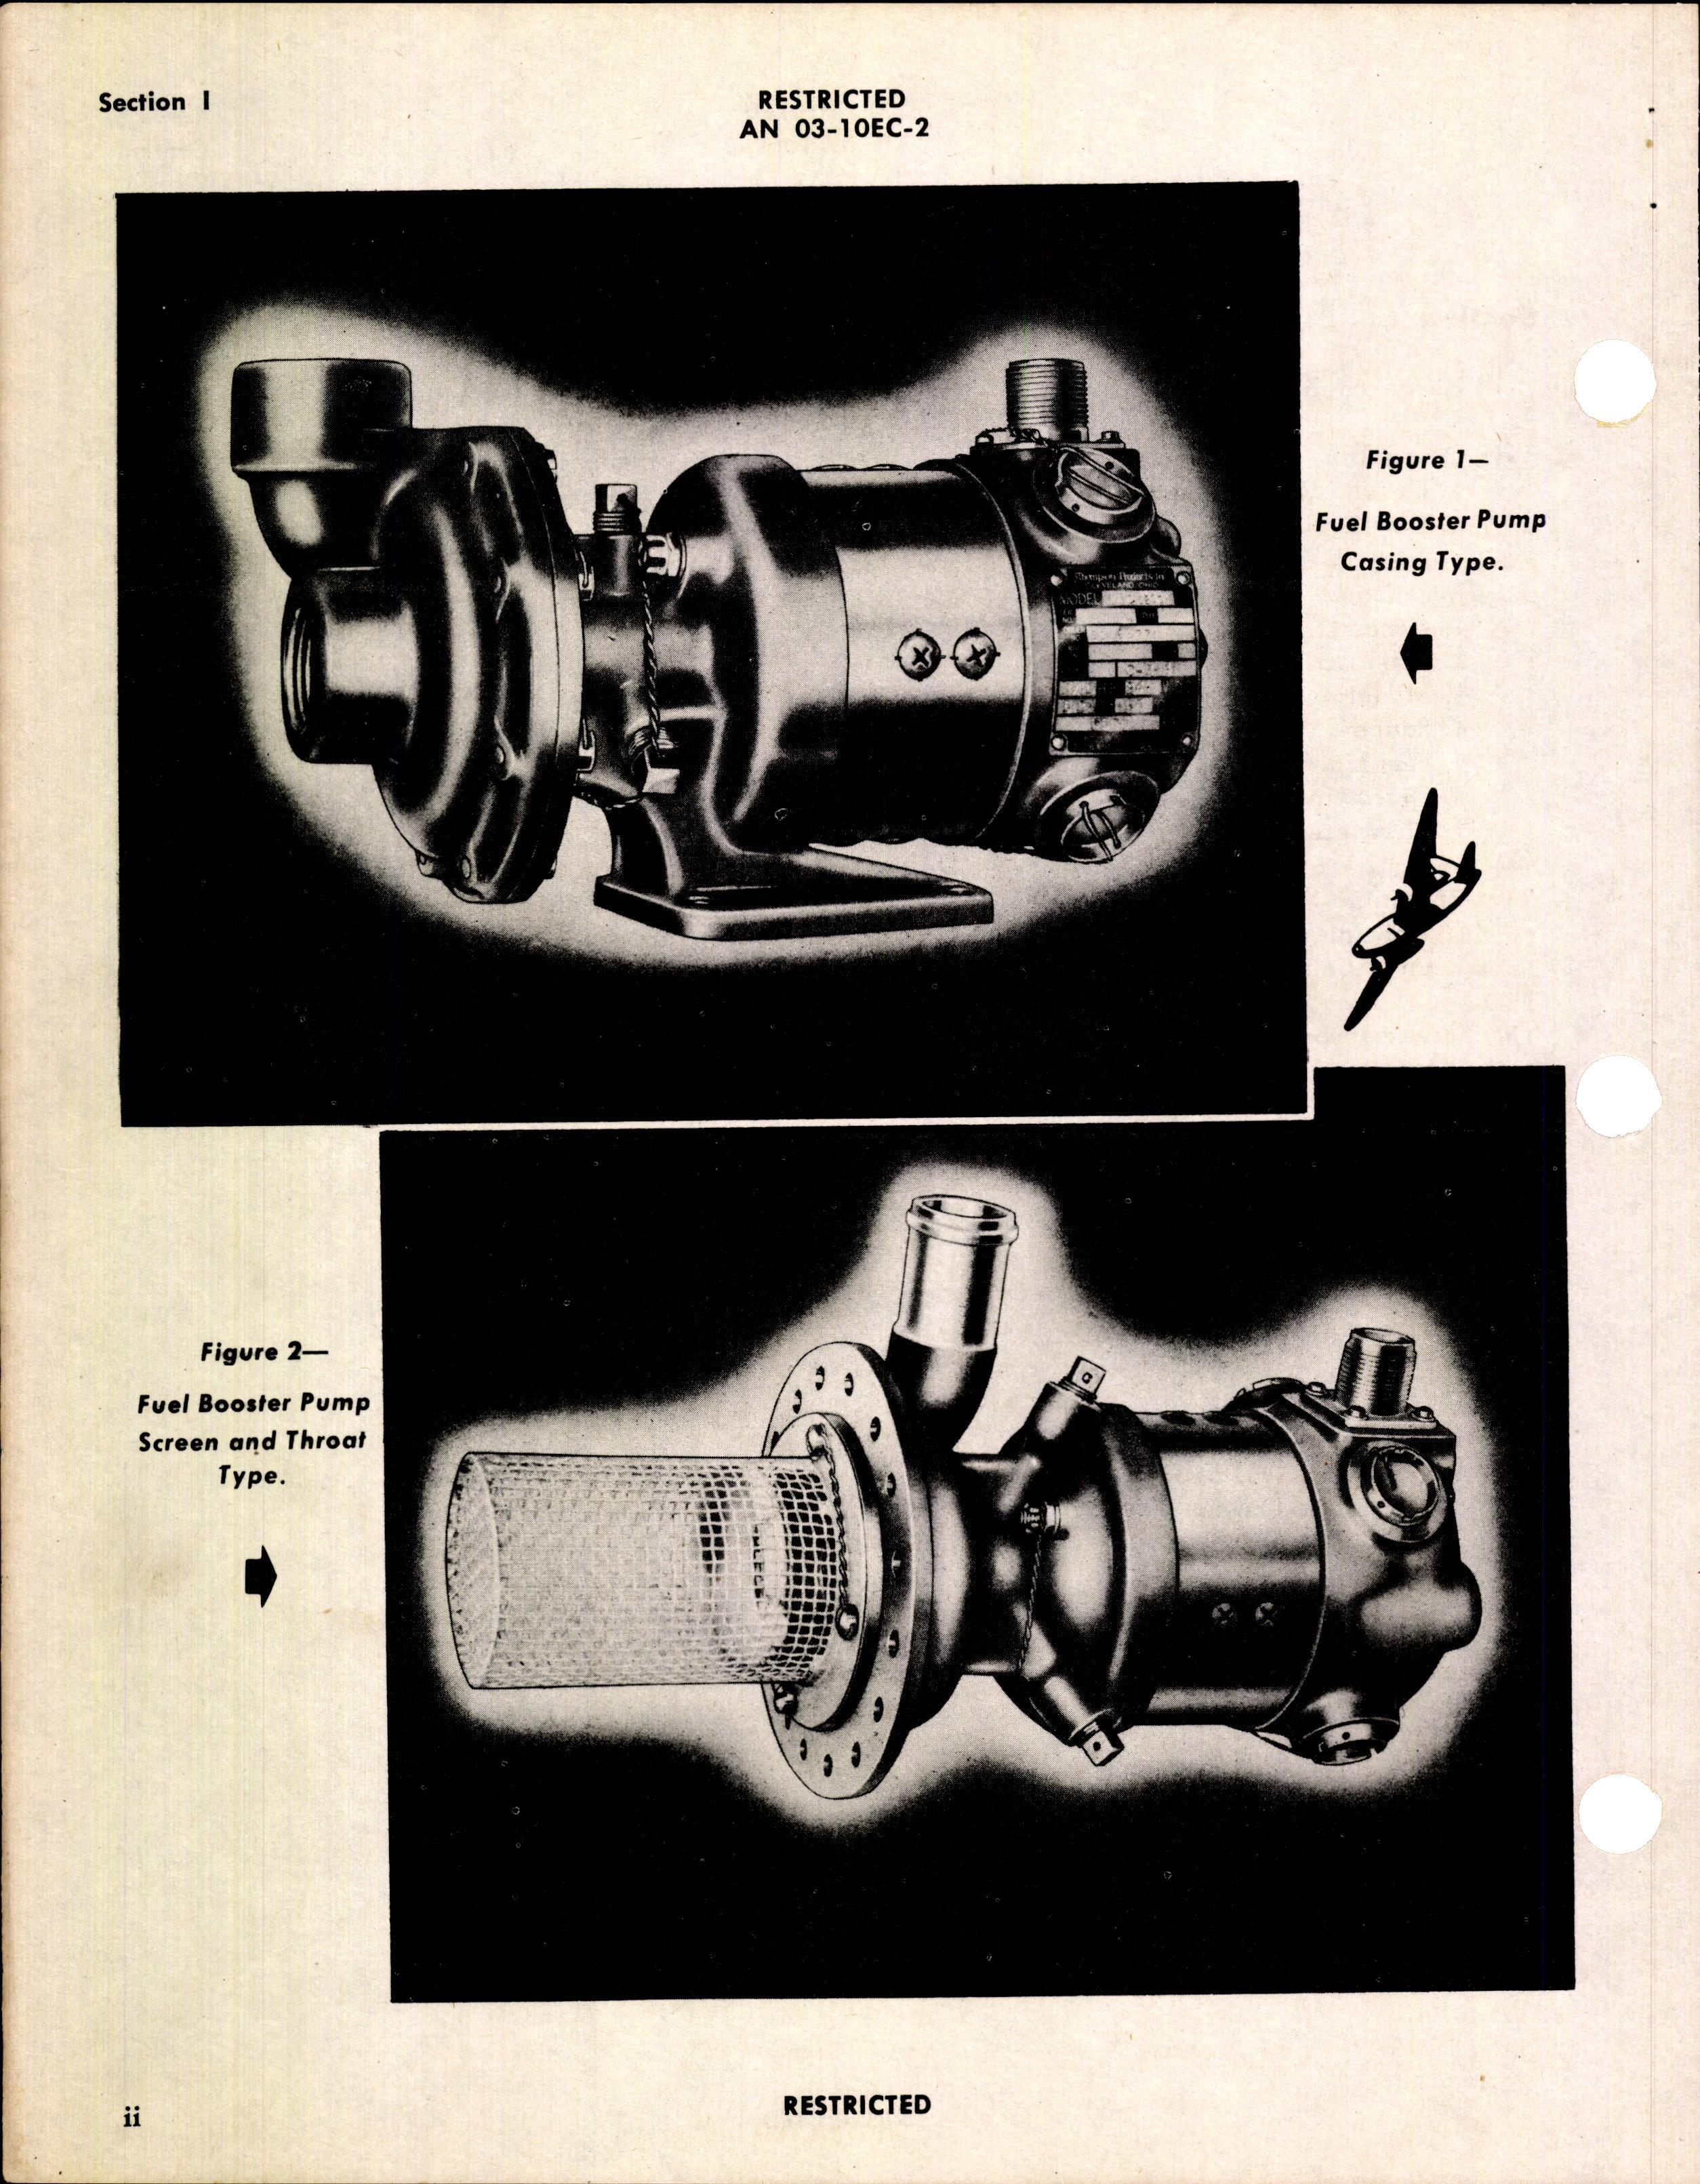 Sample page 4 from AirCorps Library document: Operation, Service, & Overhaul Instructions with Parts Catalog for Motor-Driven Fuel Booster Pumps